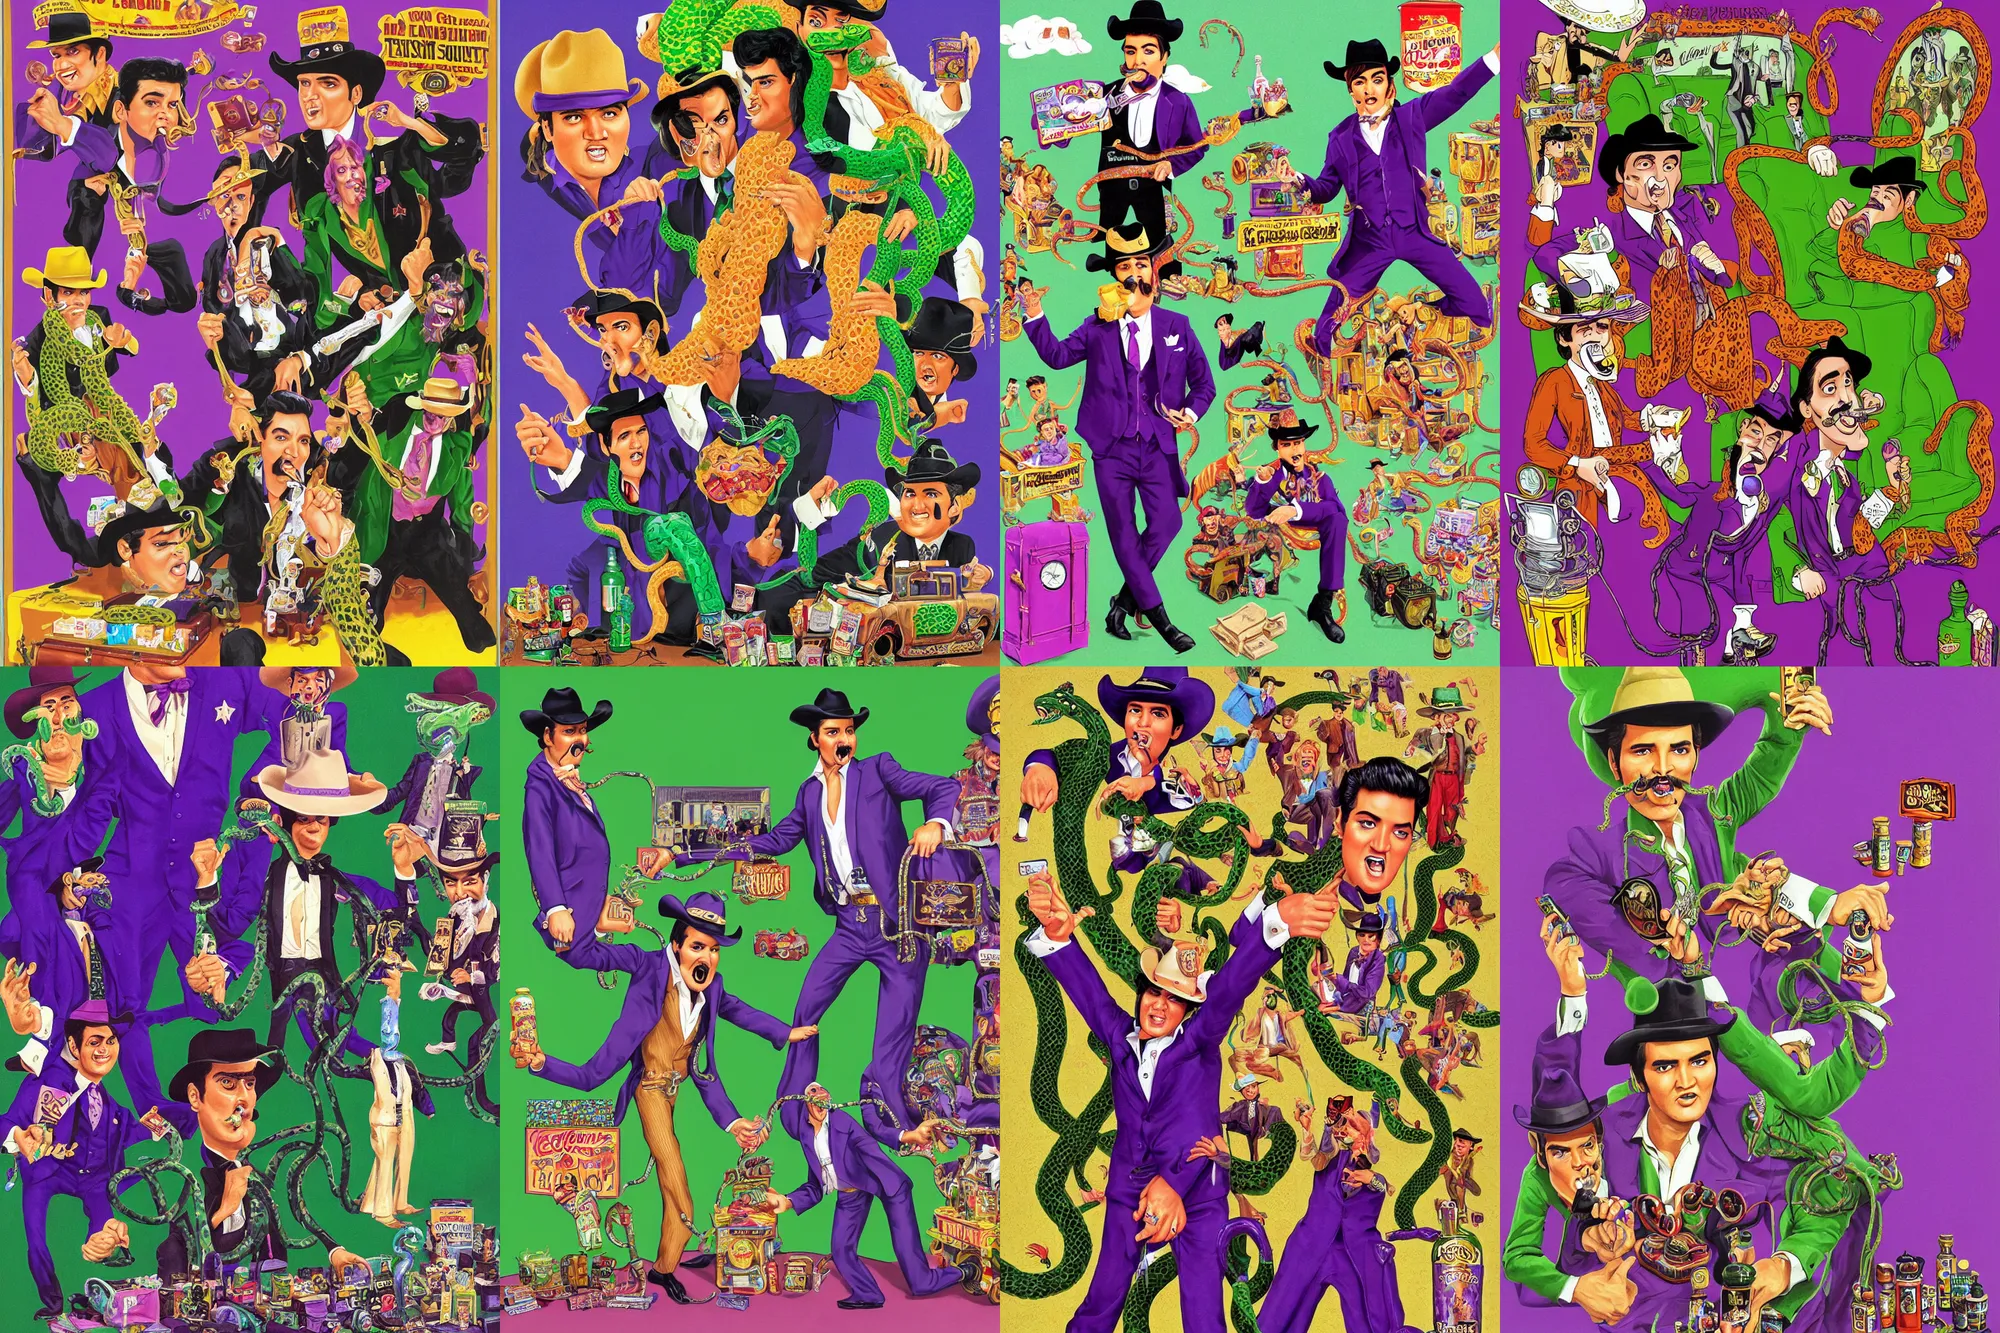 Prompt: long shot full body portrait of locomotive professional wrestling salesman elvis presley johnny cash cowboy snakeoil salesman wearing oversized cowboy hat with curly moustache and anthropomorphic purple snakeskin business suit, pictured in front of a green screen selling petroleum snake oil stimulant bottled in hyper bullish faberge briefcases on wheels, portrait art by lisa frank and basil wolverton